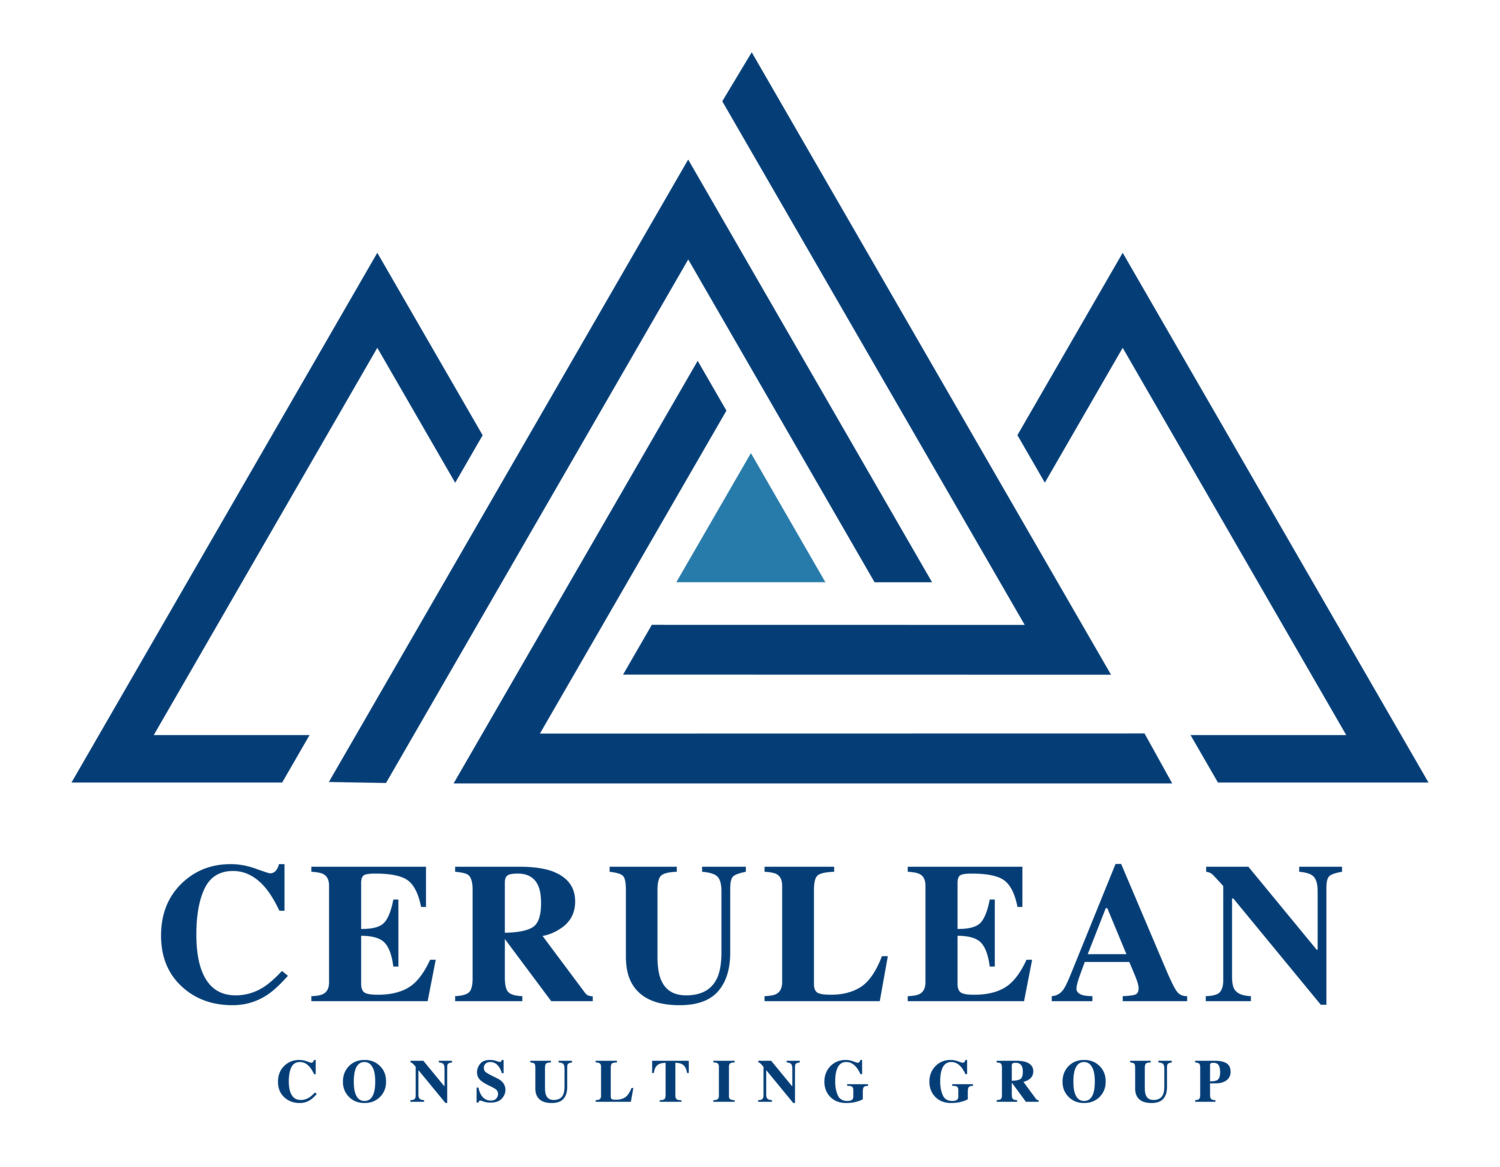 Cerulean Consulting Group